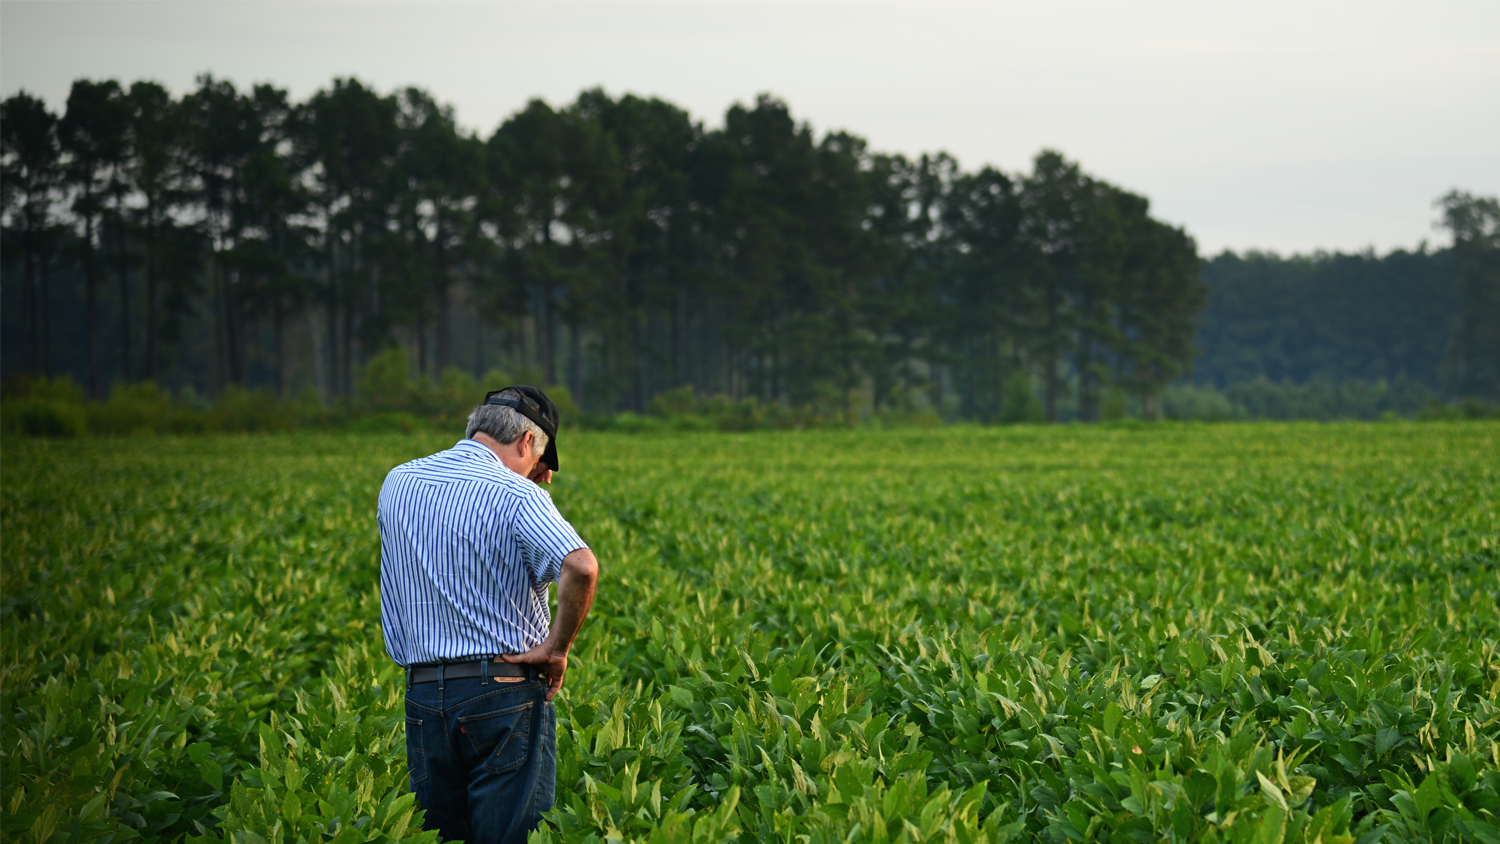 NC State University researcher examining a soybean field.